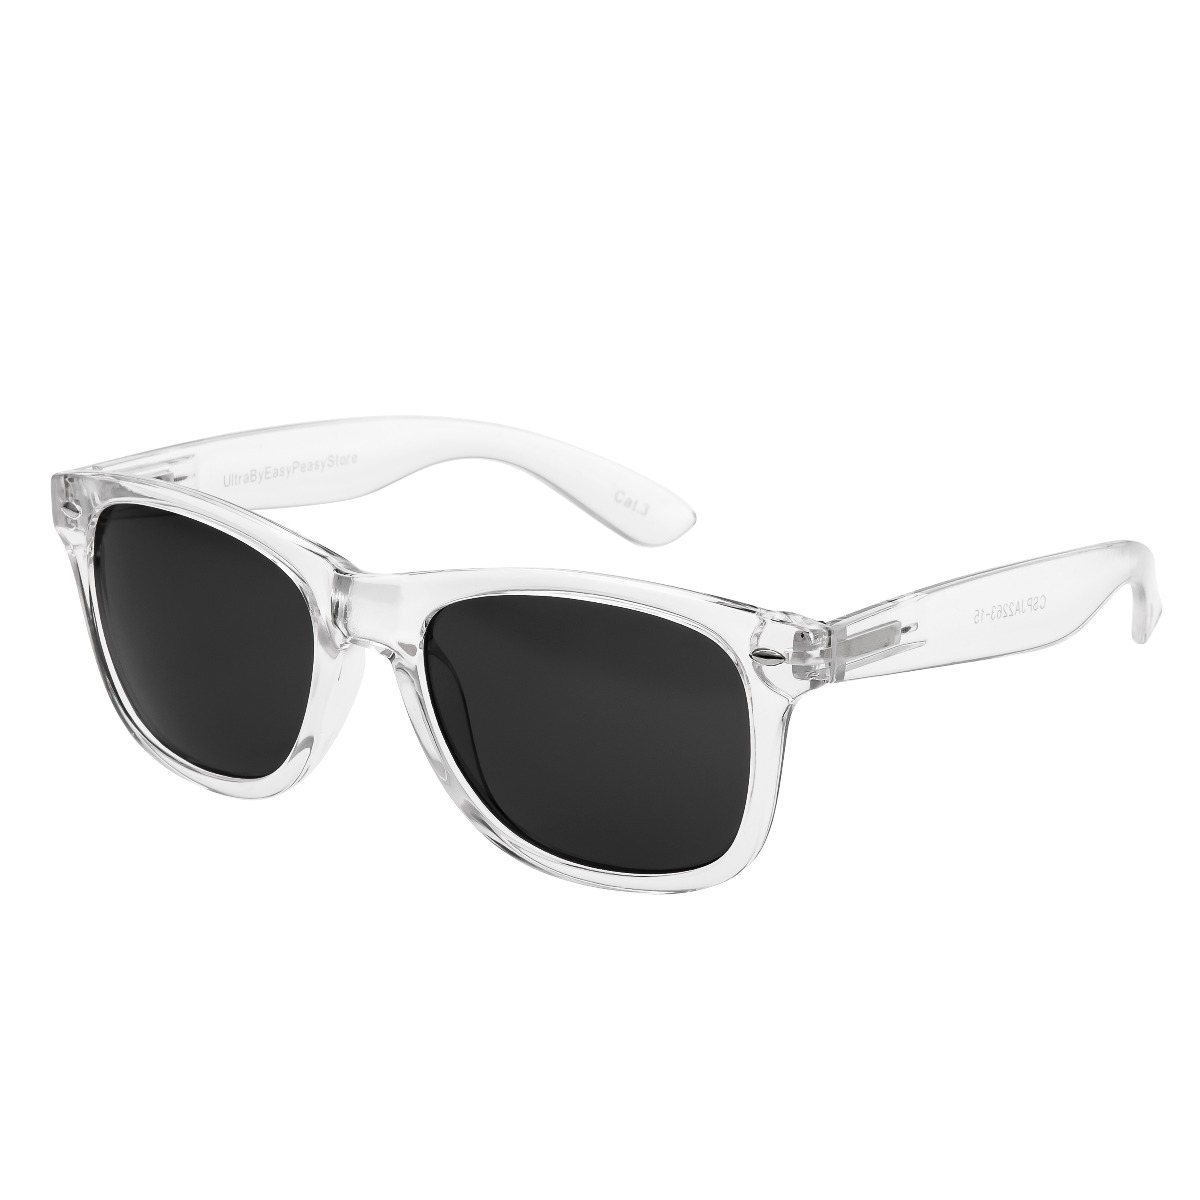 Clear Frame Adults Transparent Sunglasses